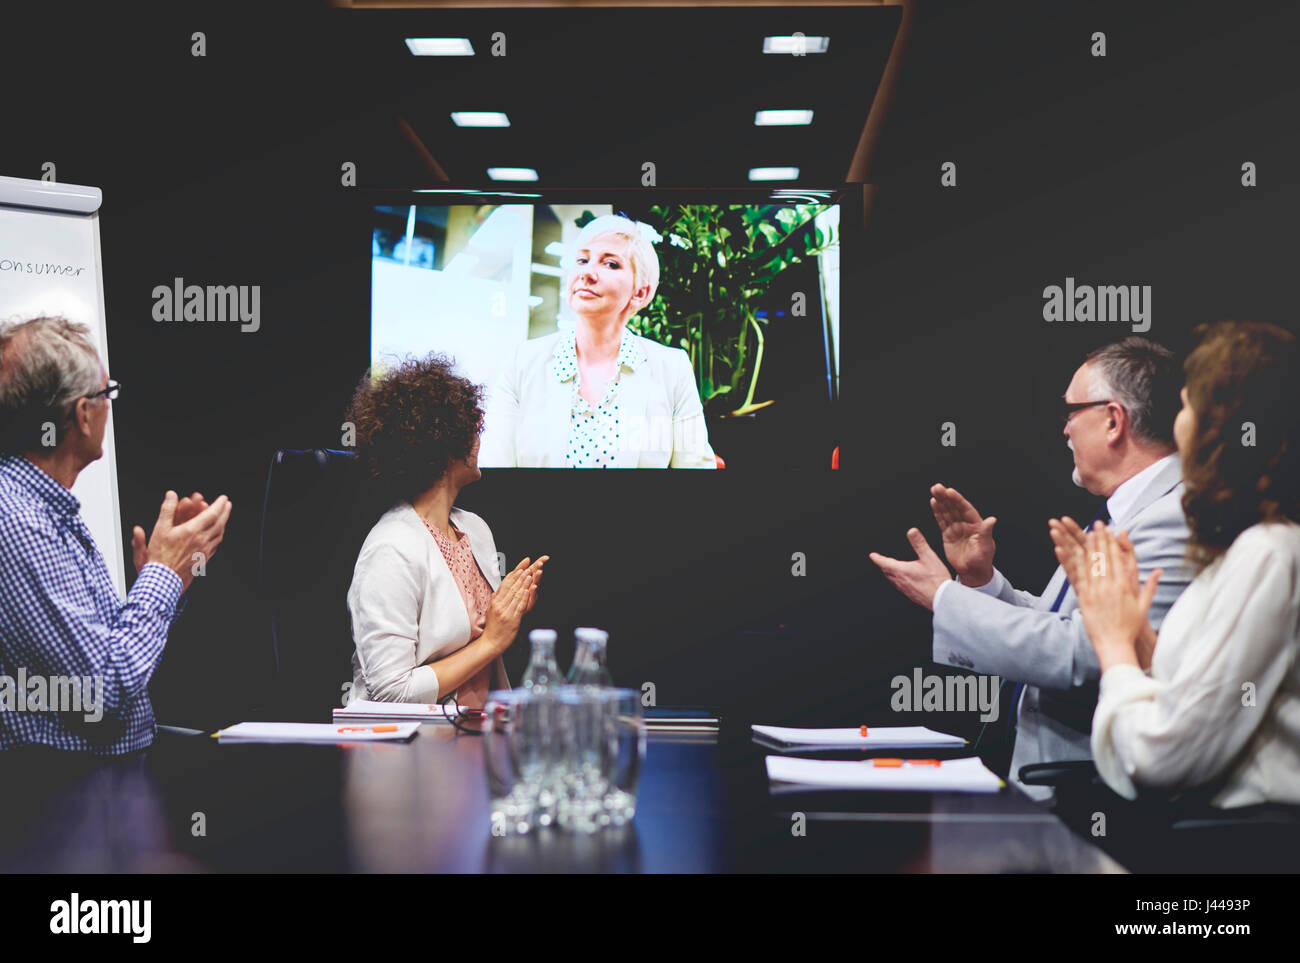 Business people clapping for colleague on video call Stock Photo